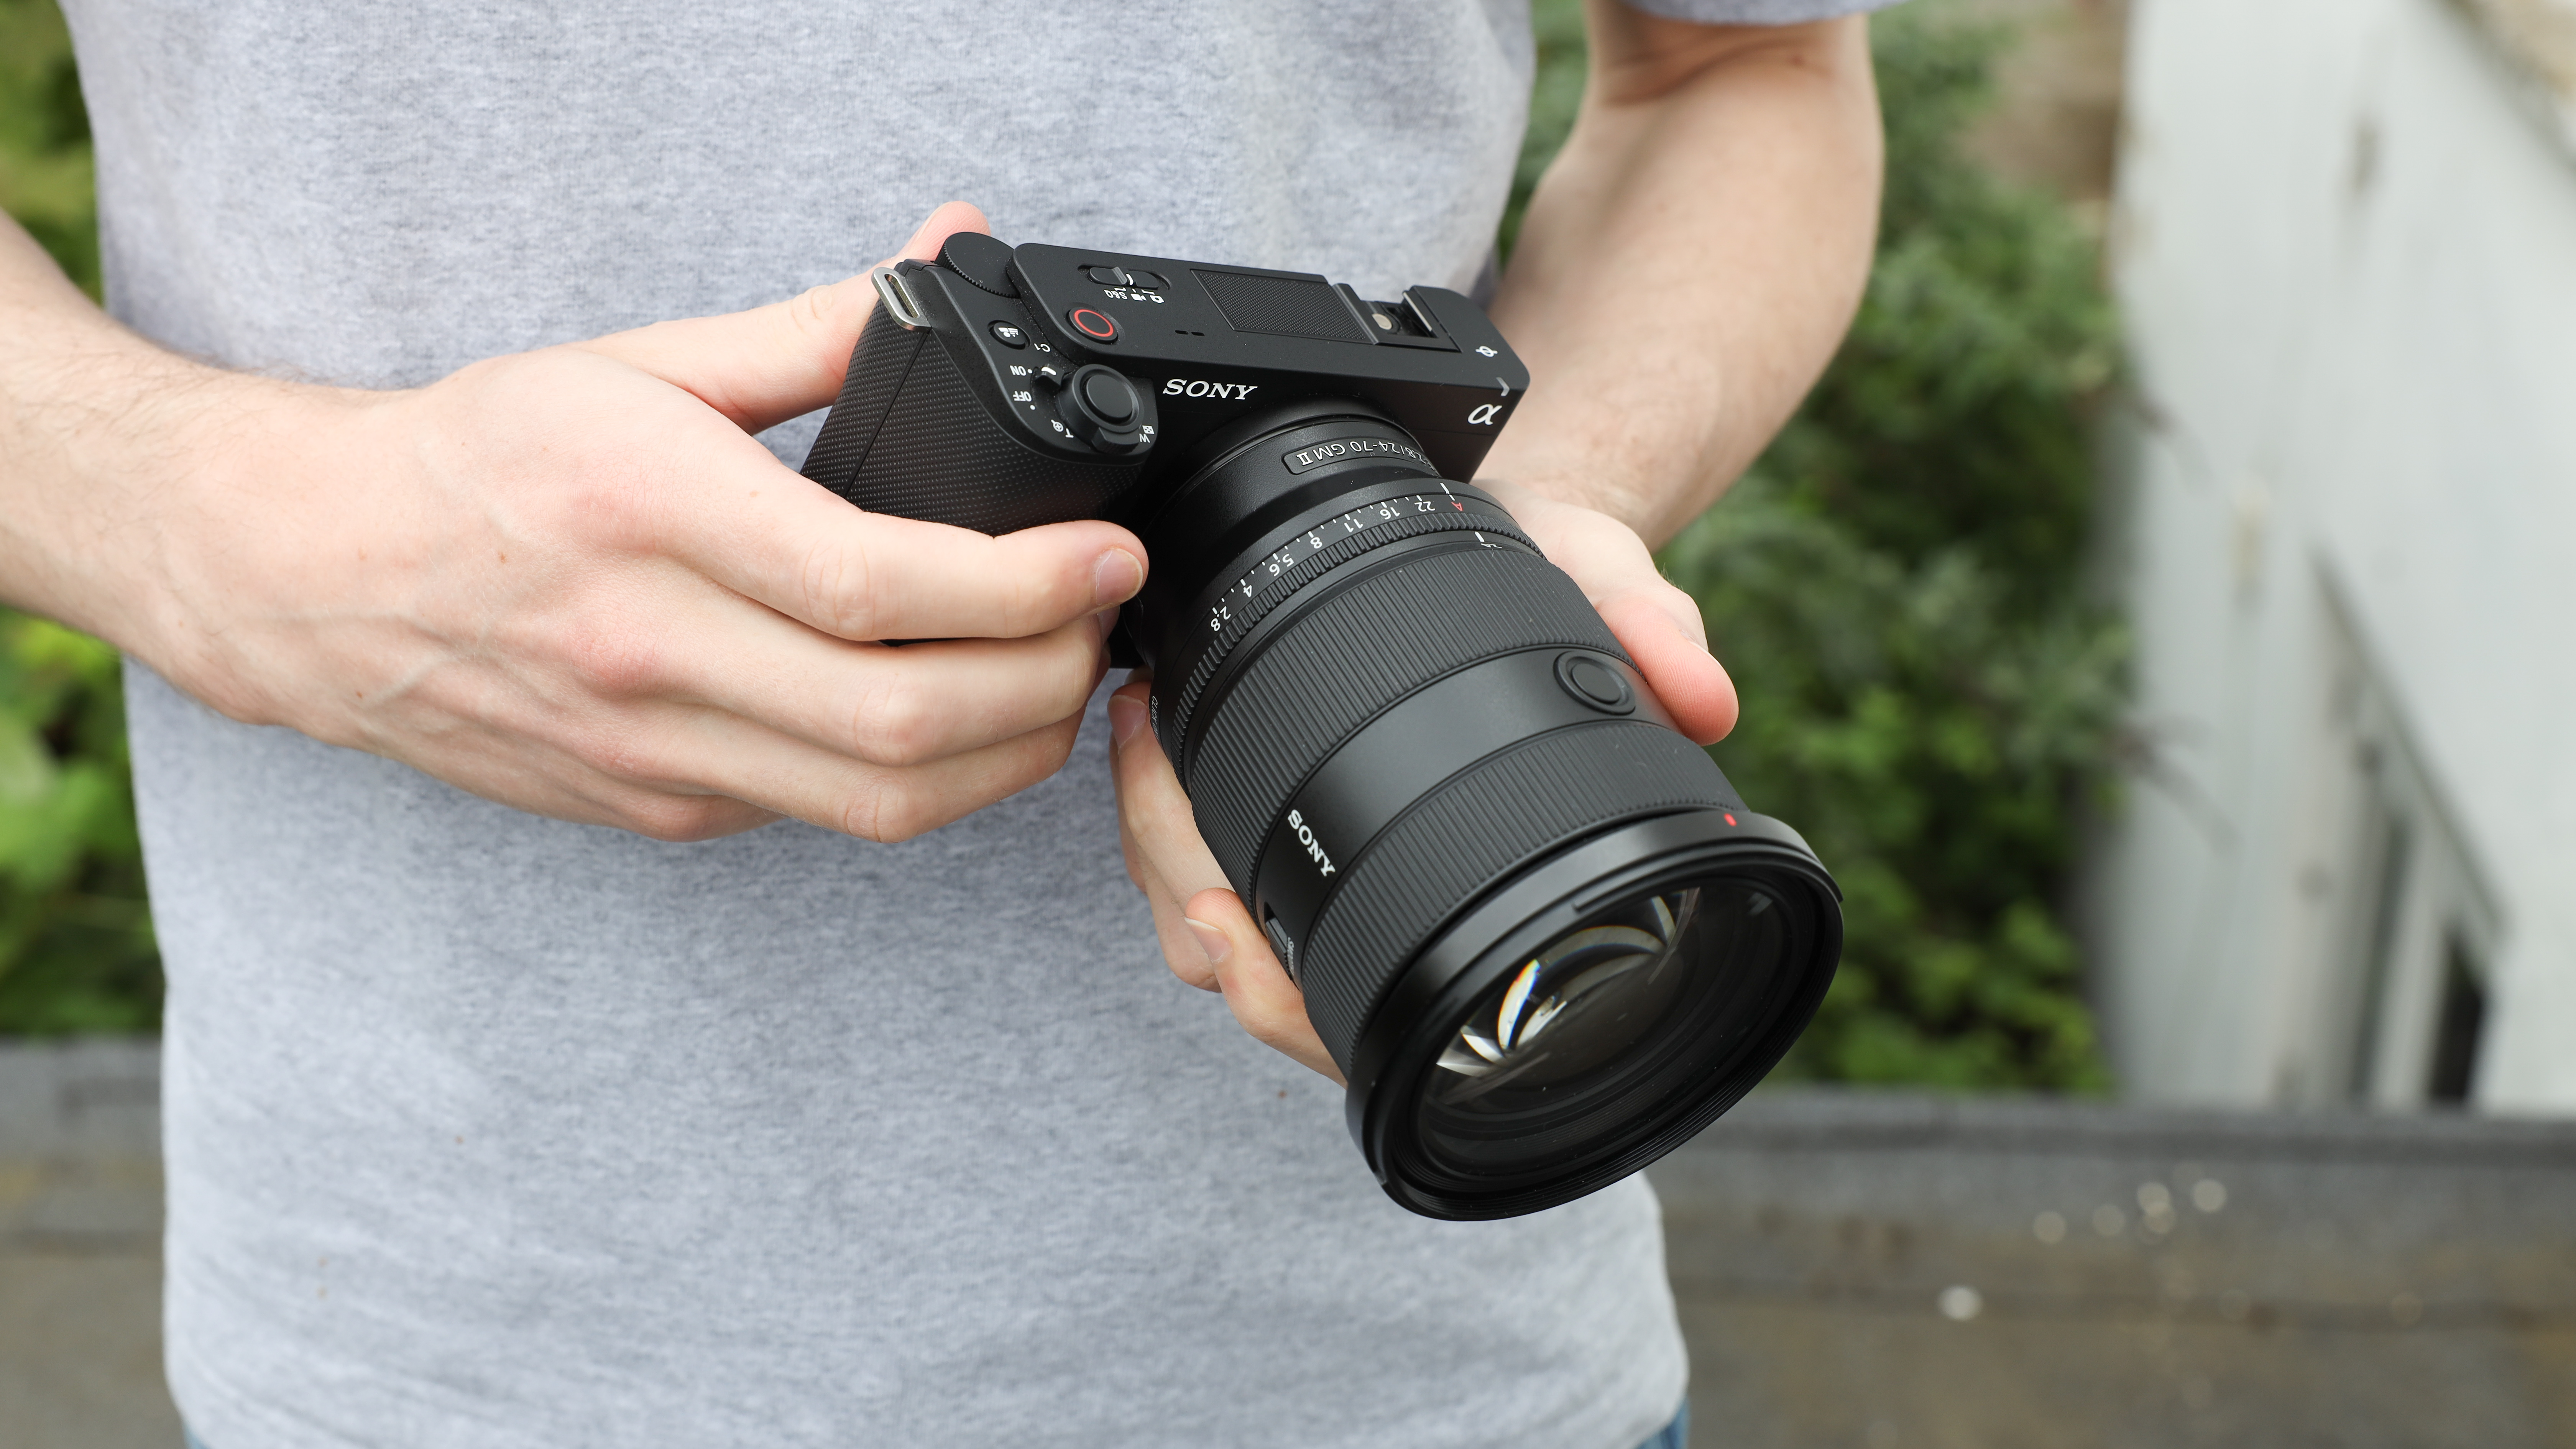 Sony ZV-E1 Camera: Hands-On Review with Sal D'Alia